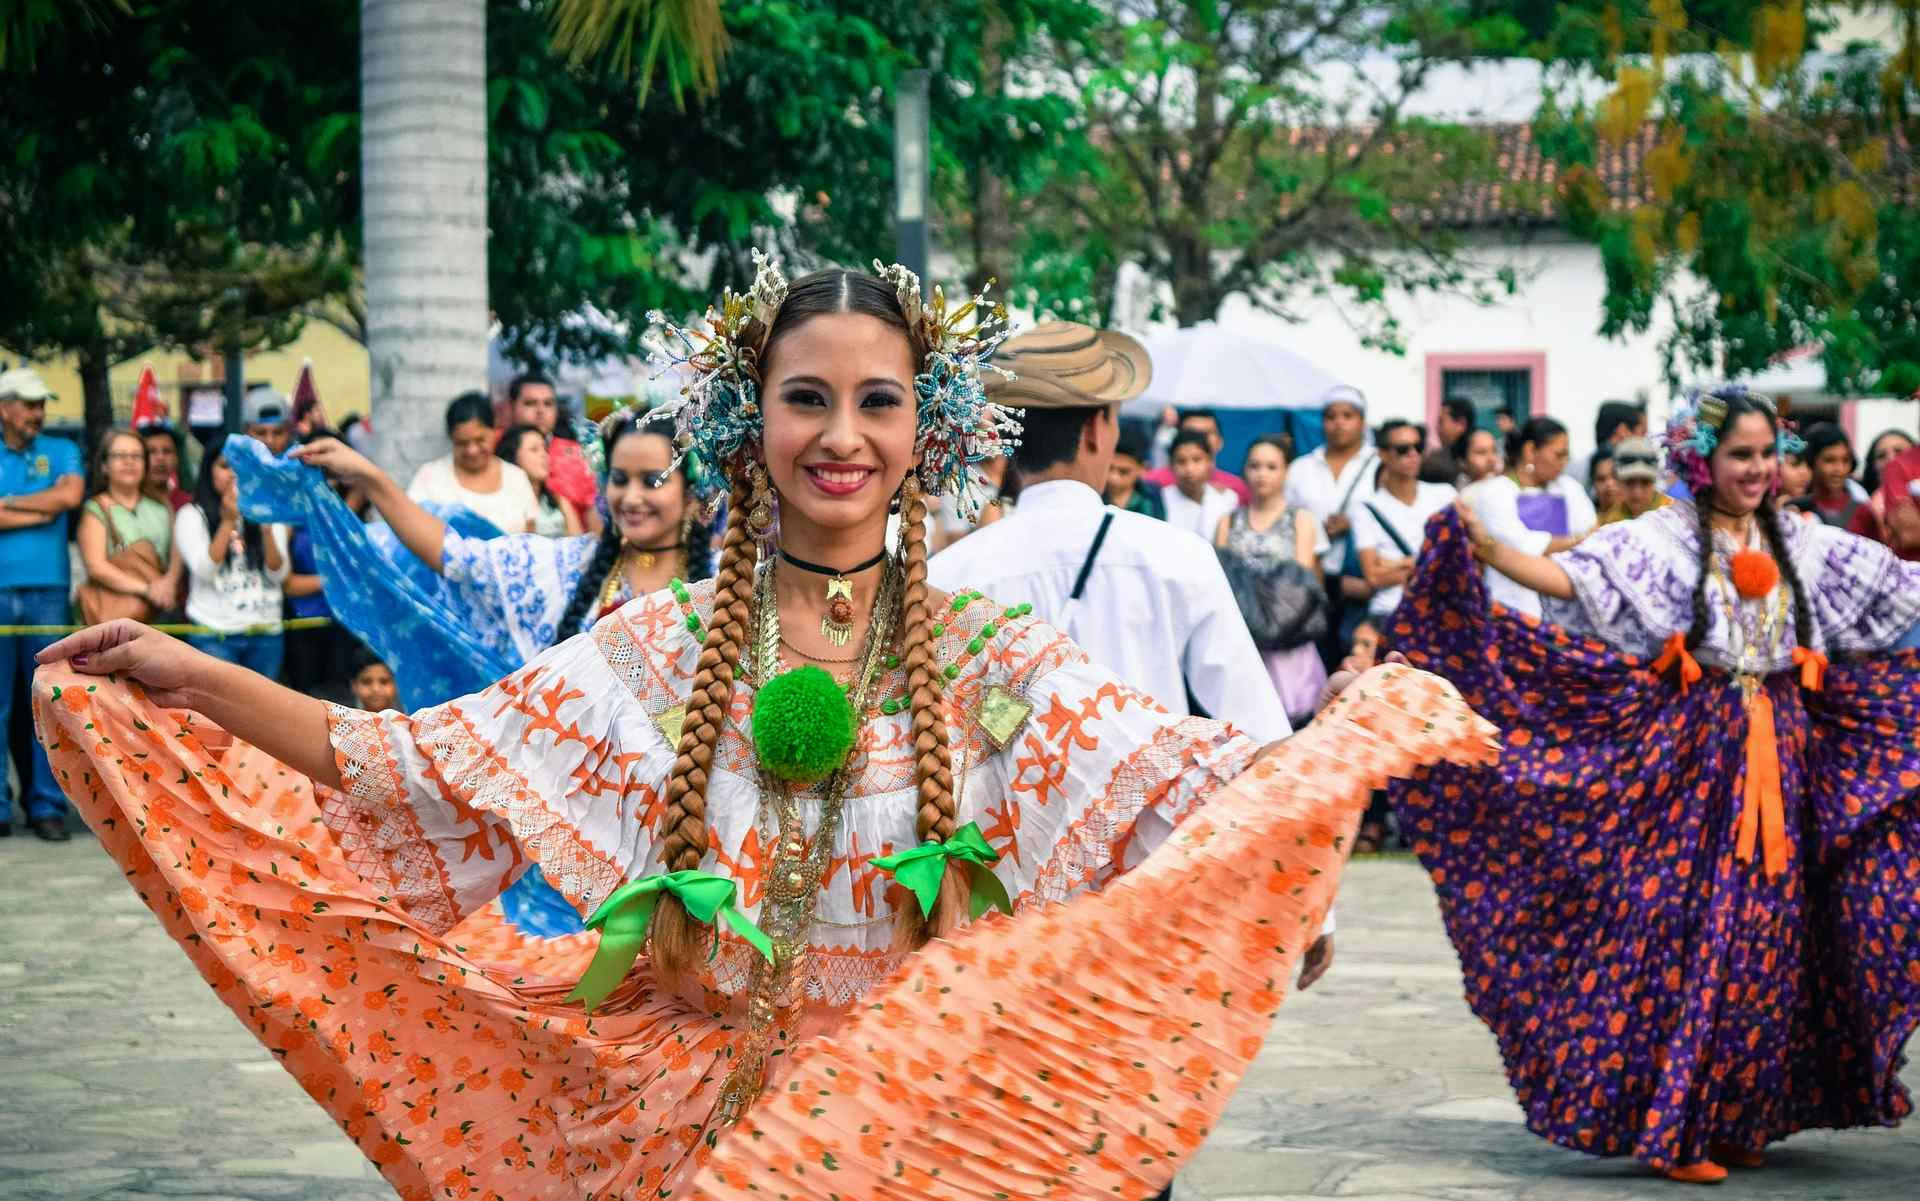 Young woman in traditional dress, Costa Rica.